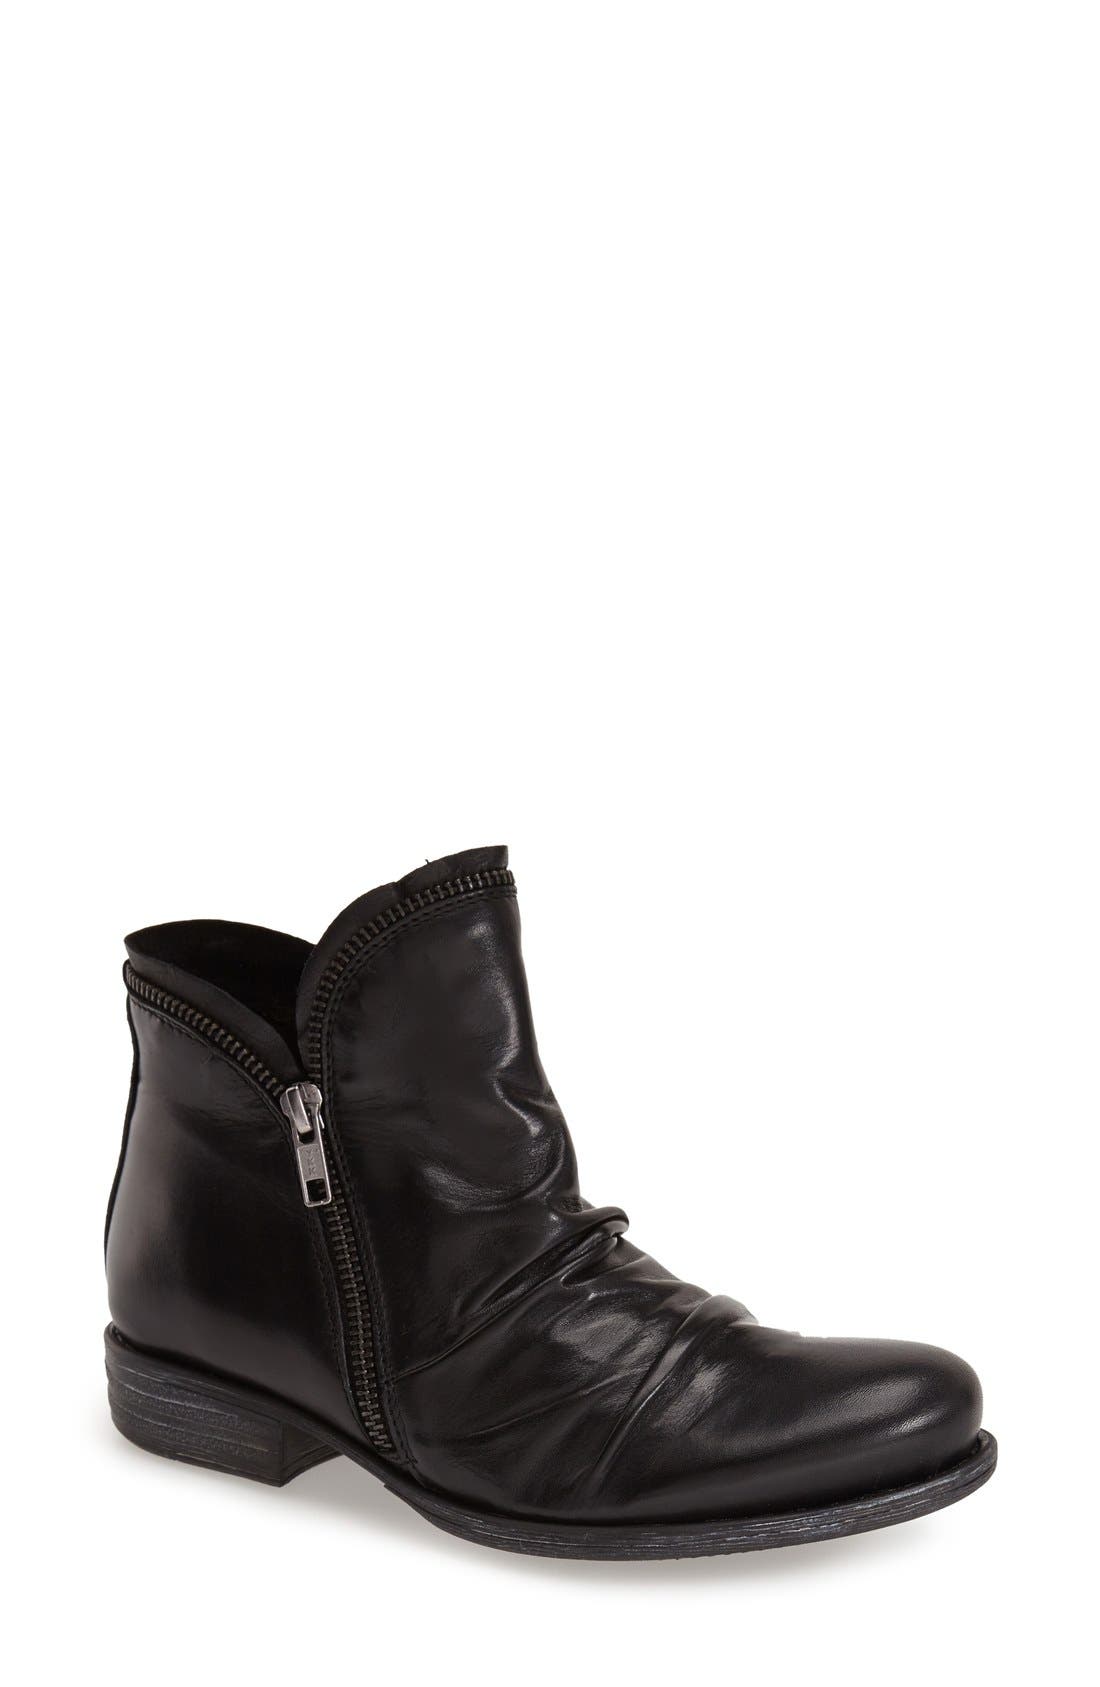 Buy > slouchy ankle boots flat > in stock